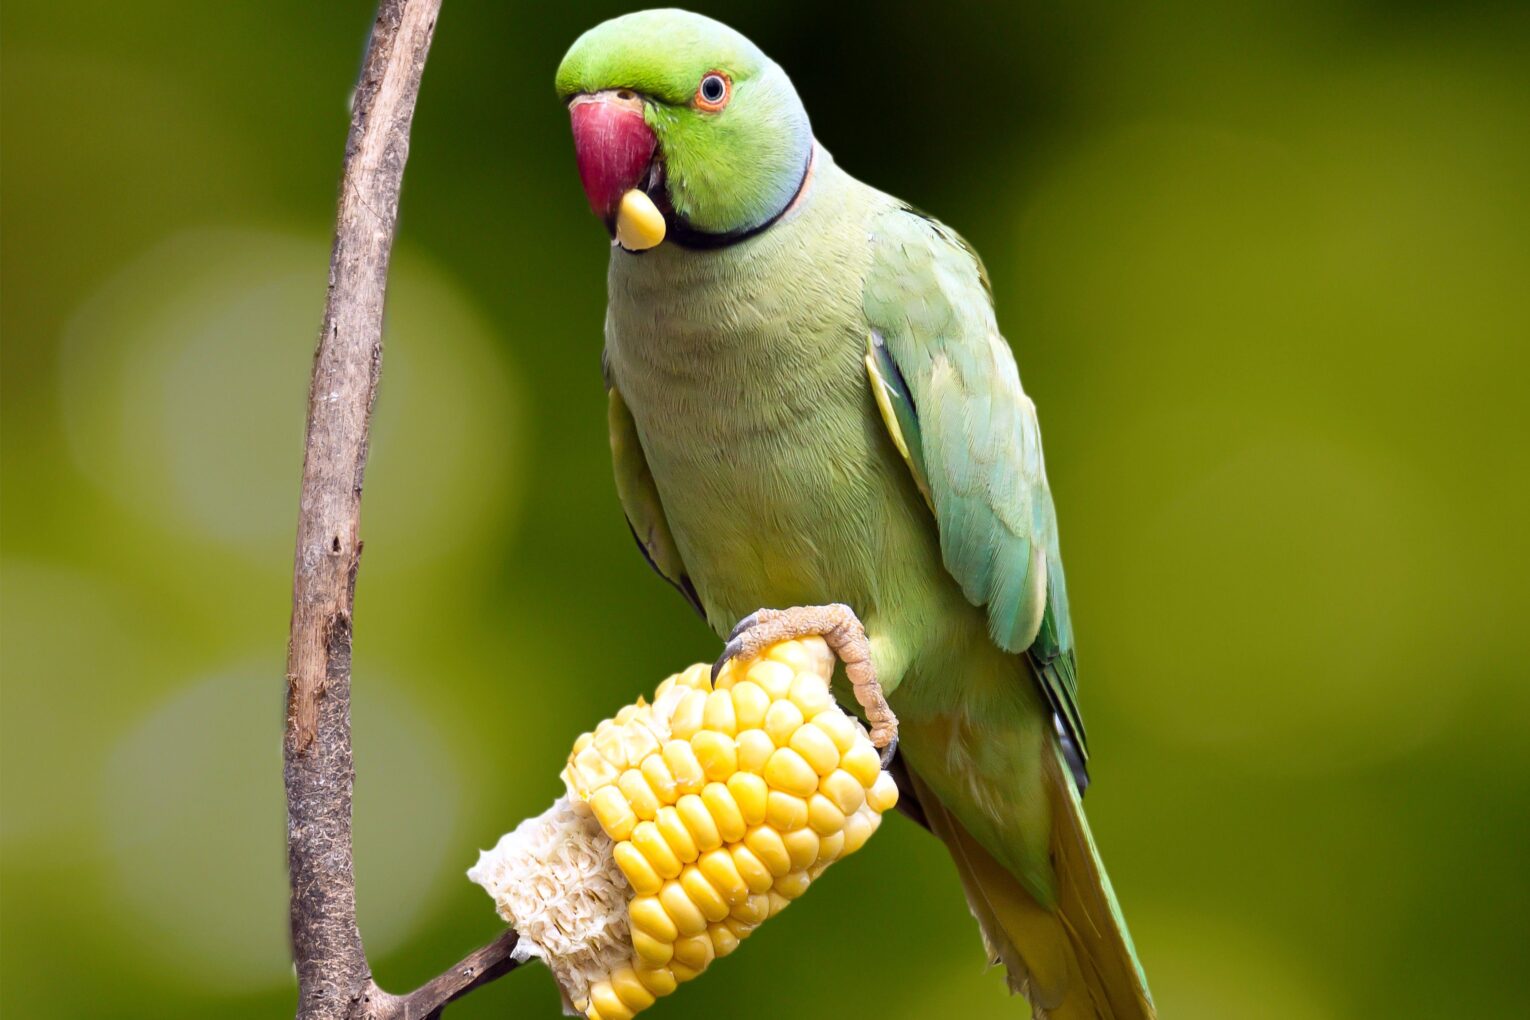 Which Vegetables Can Parrots Eat?